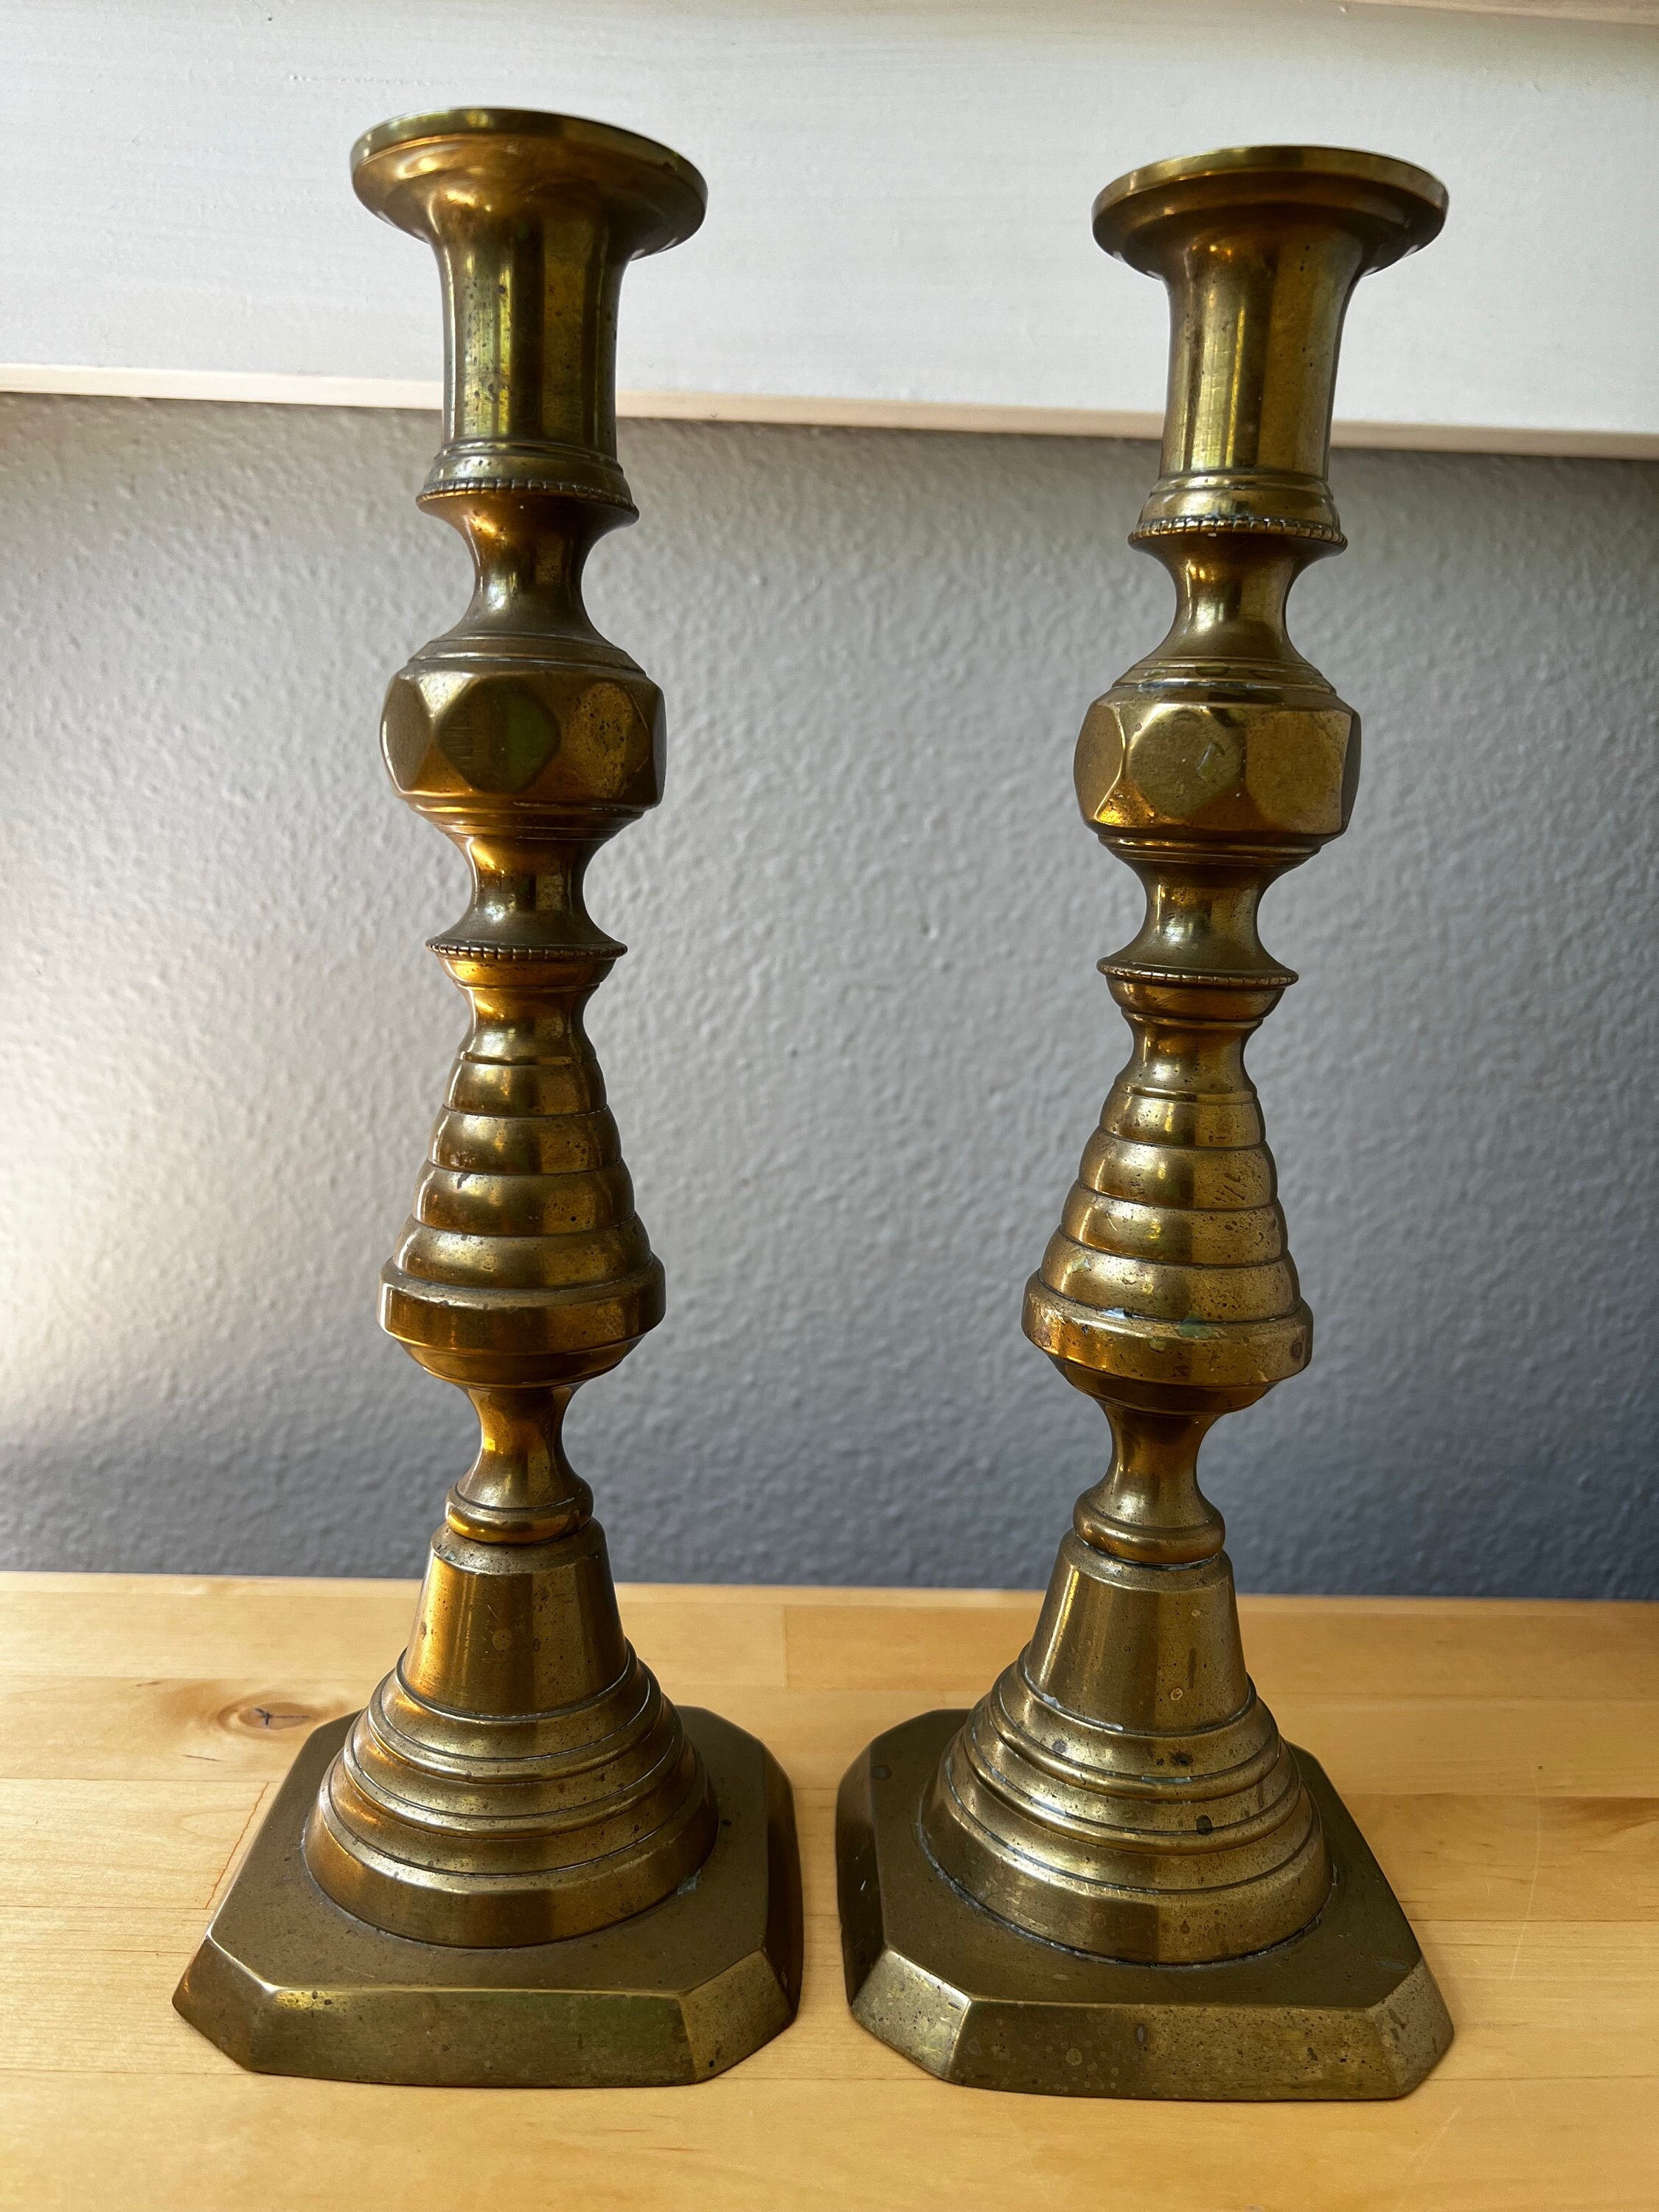 Buy Pair of Mid 1800s Brass Candle Stick Holders Beautiful Beehive Design  Candle Push up Rods Online in India 